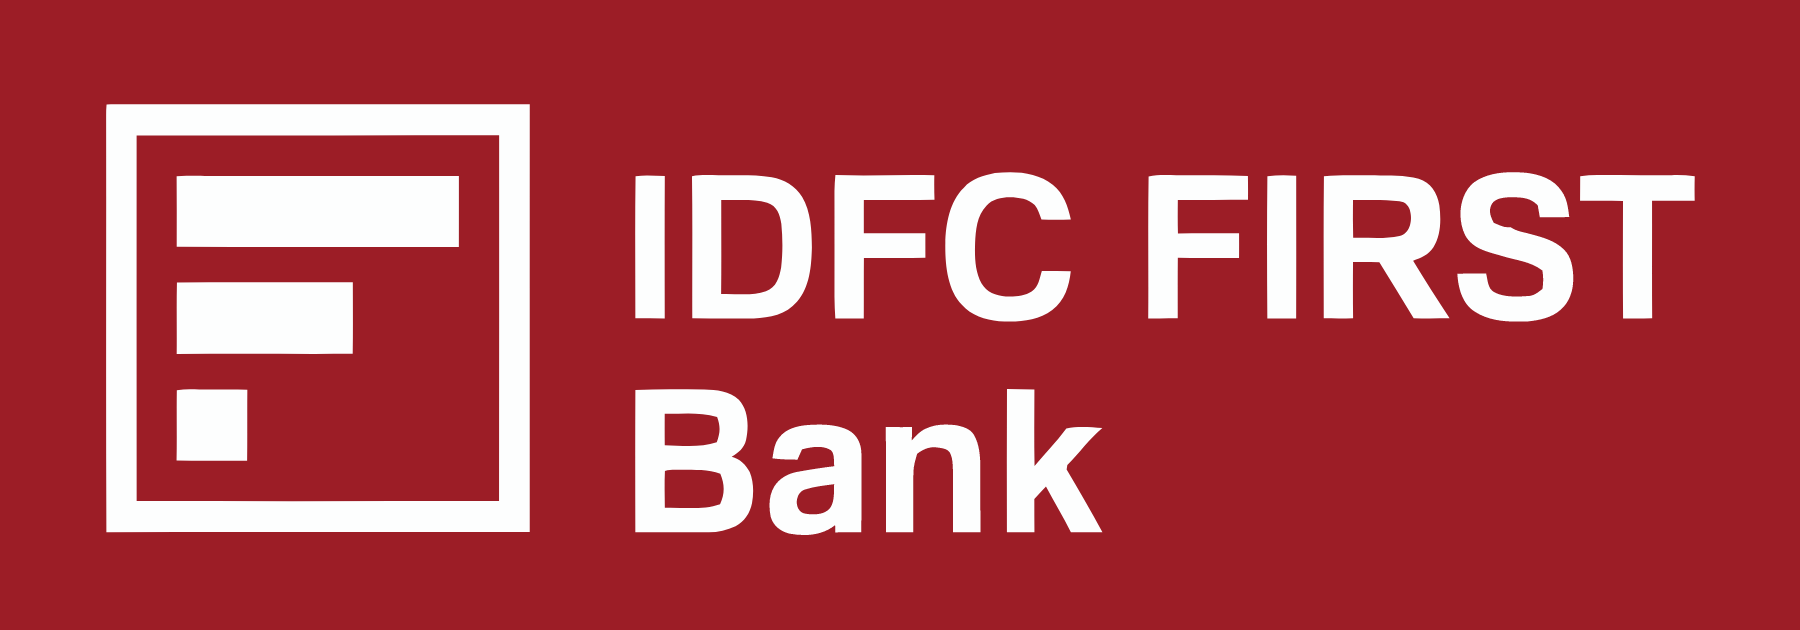 About MD and CEO | IDFC FIRST Bank